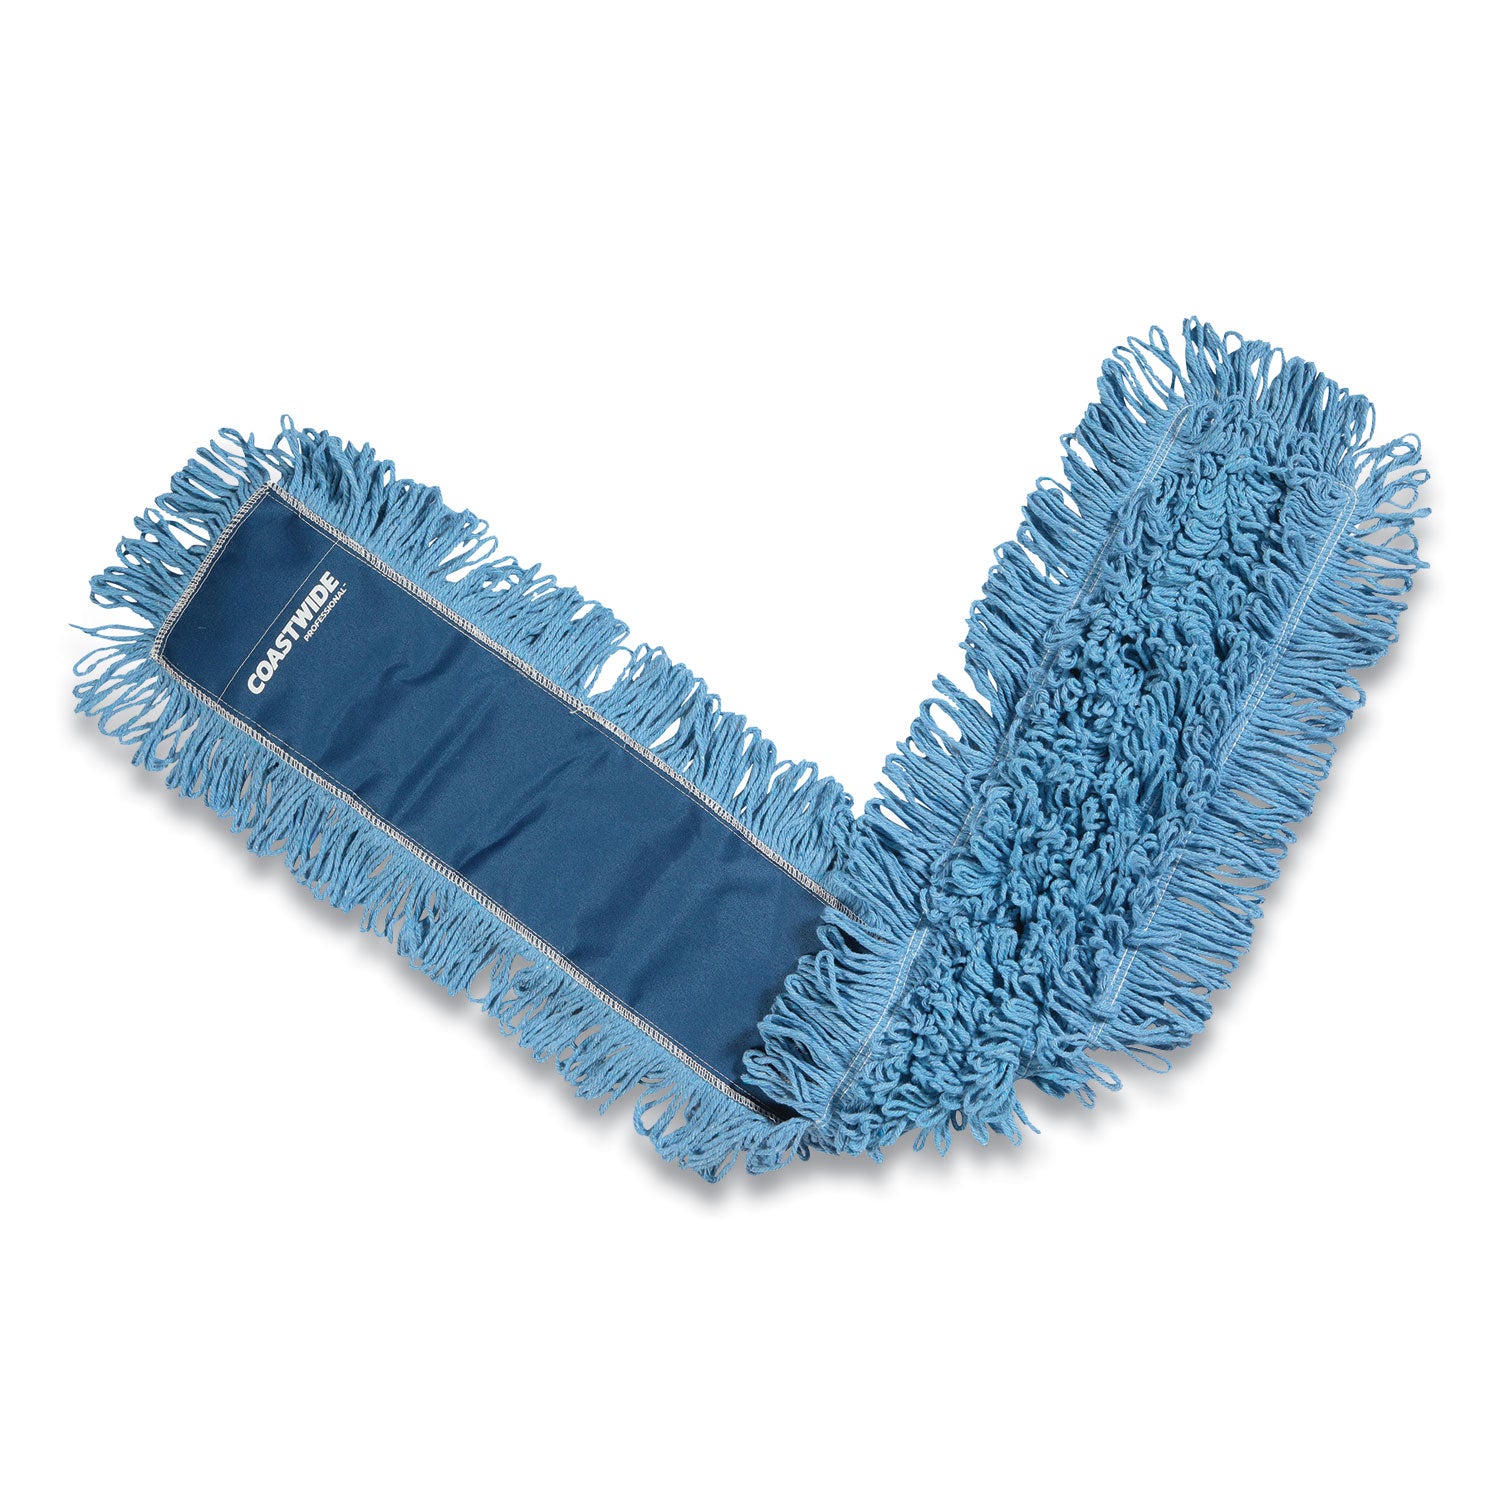 looped-end-dust-mop-head-cotton-48-x-5-blue_cwz24418765 - 1